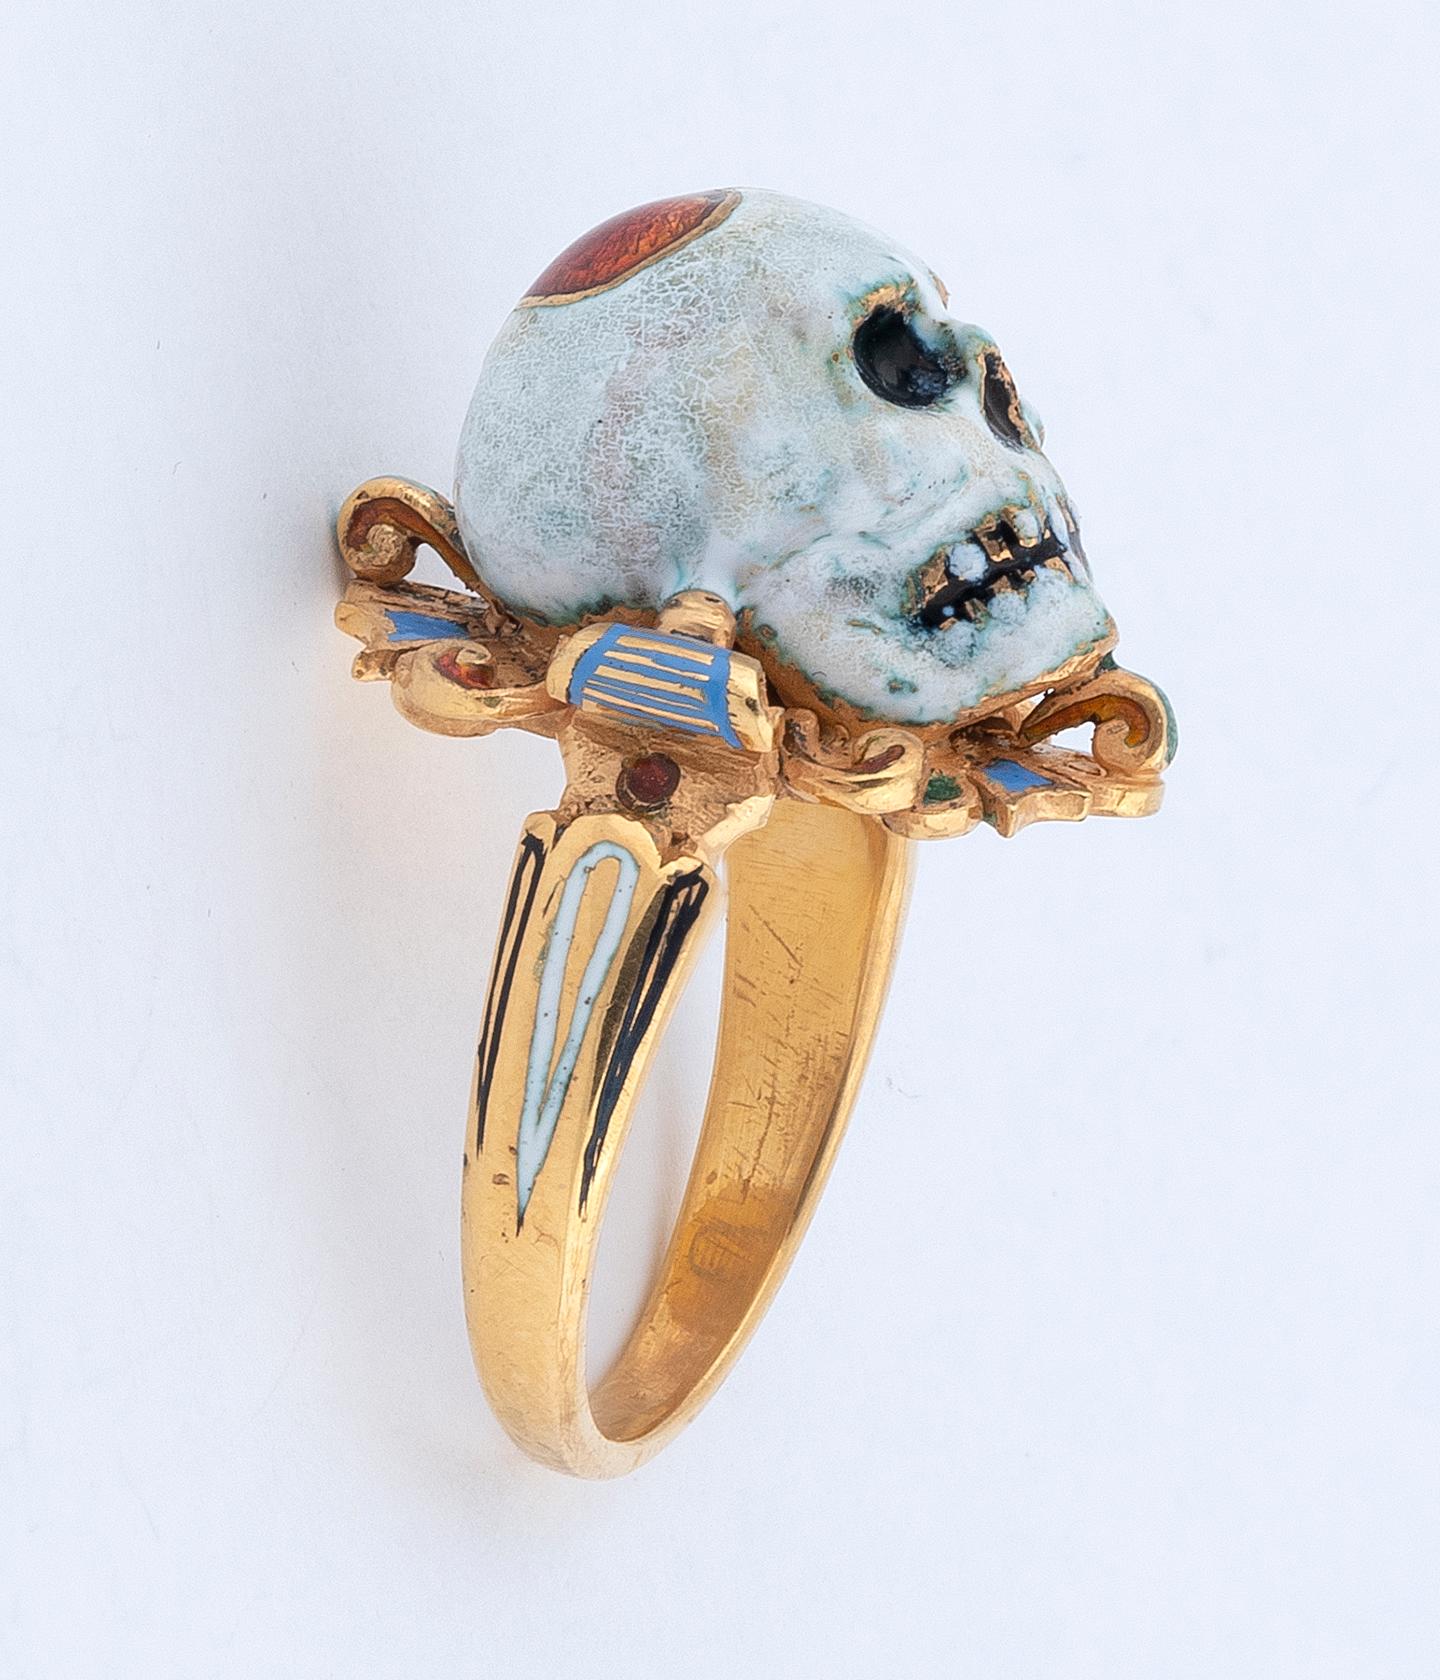 Renaissance style Memento Mori skull ring made with champleve multicolored enamels.
Mounted in 18Kt gold
Signed A. Codognato Venezia
Weight: 14.2 gr
Finger size: 7